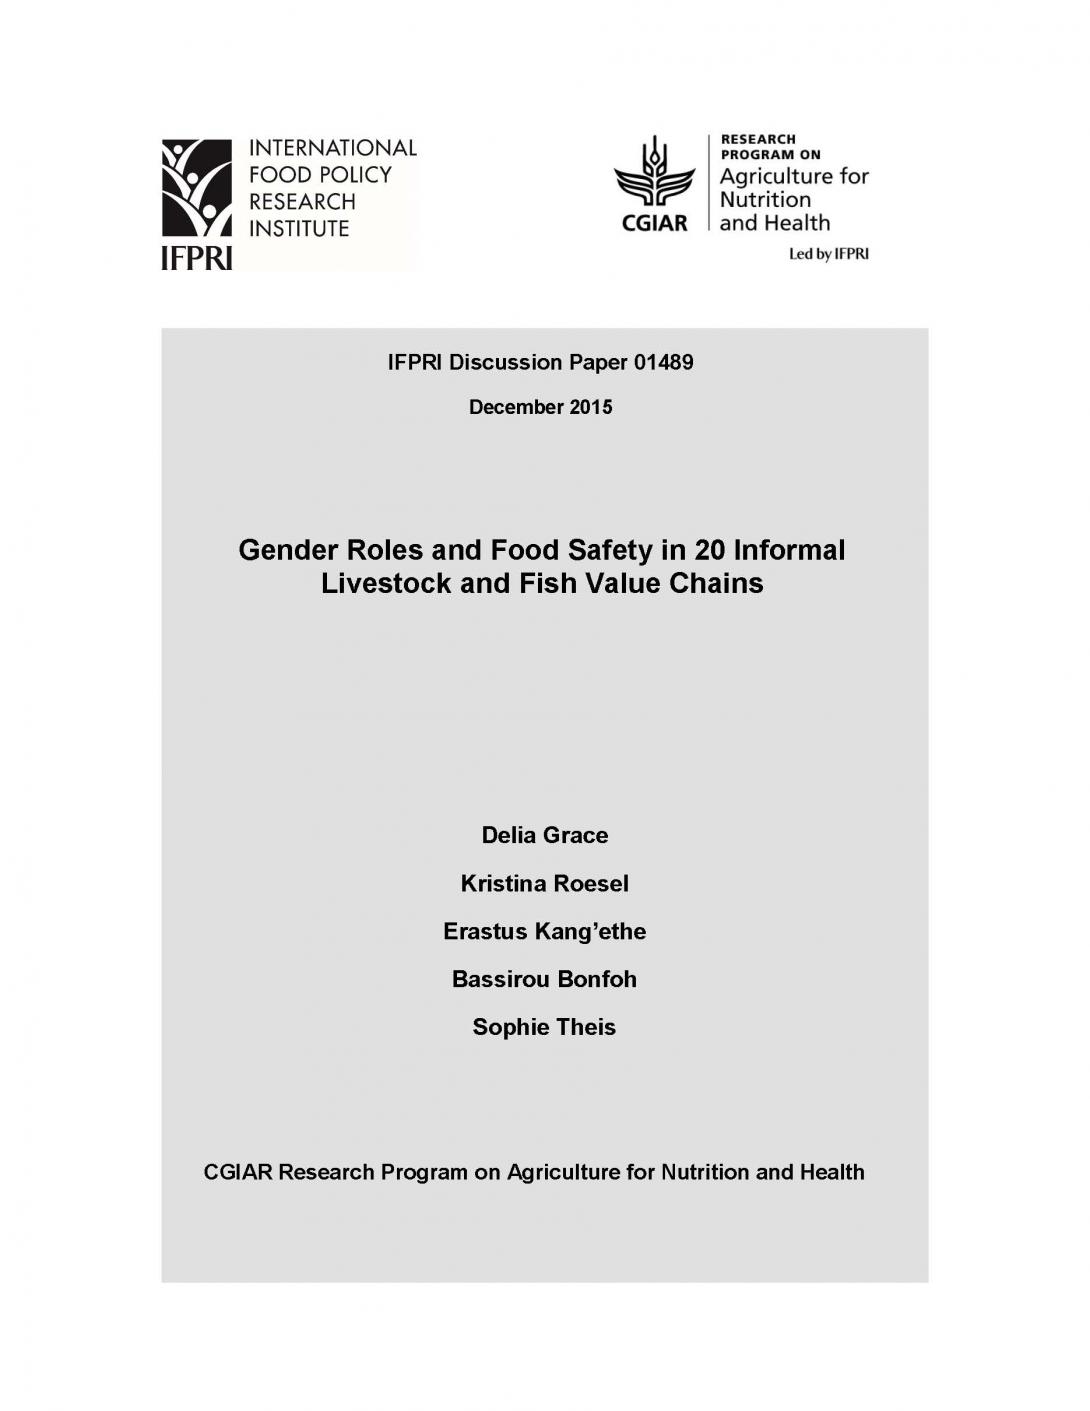 Gender roles and food safety in 20 informal livestock and fish value chains